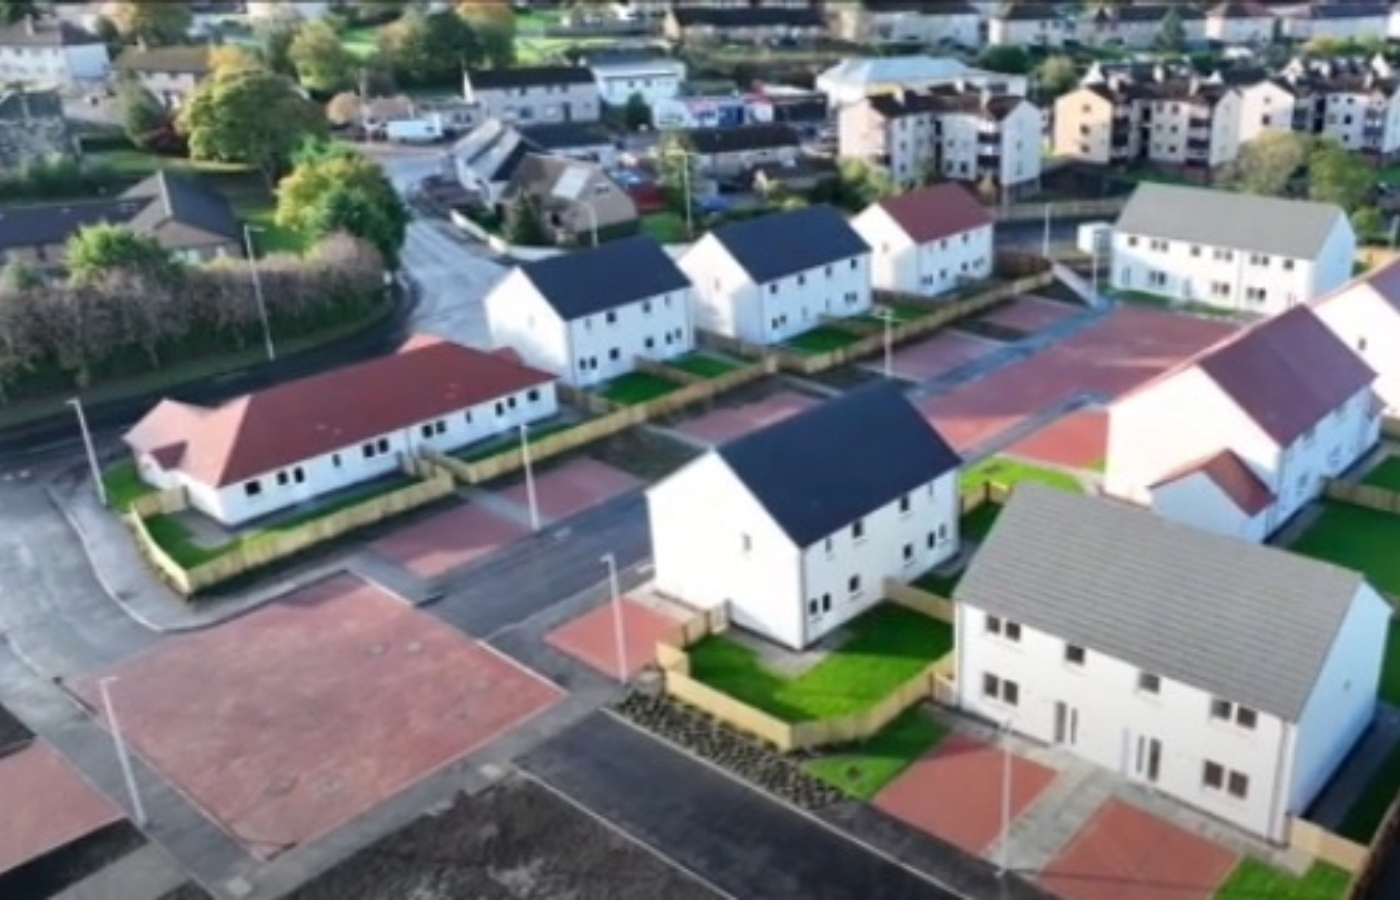 Council housing (Image from Leader's Update video on YouTube).